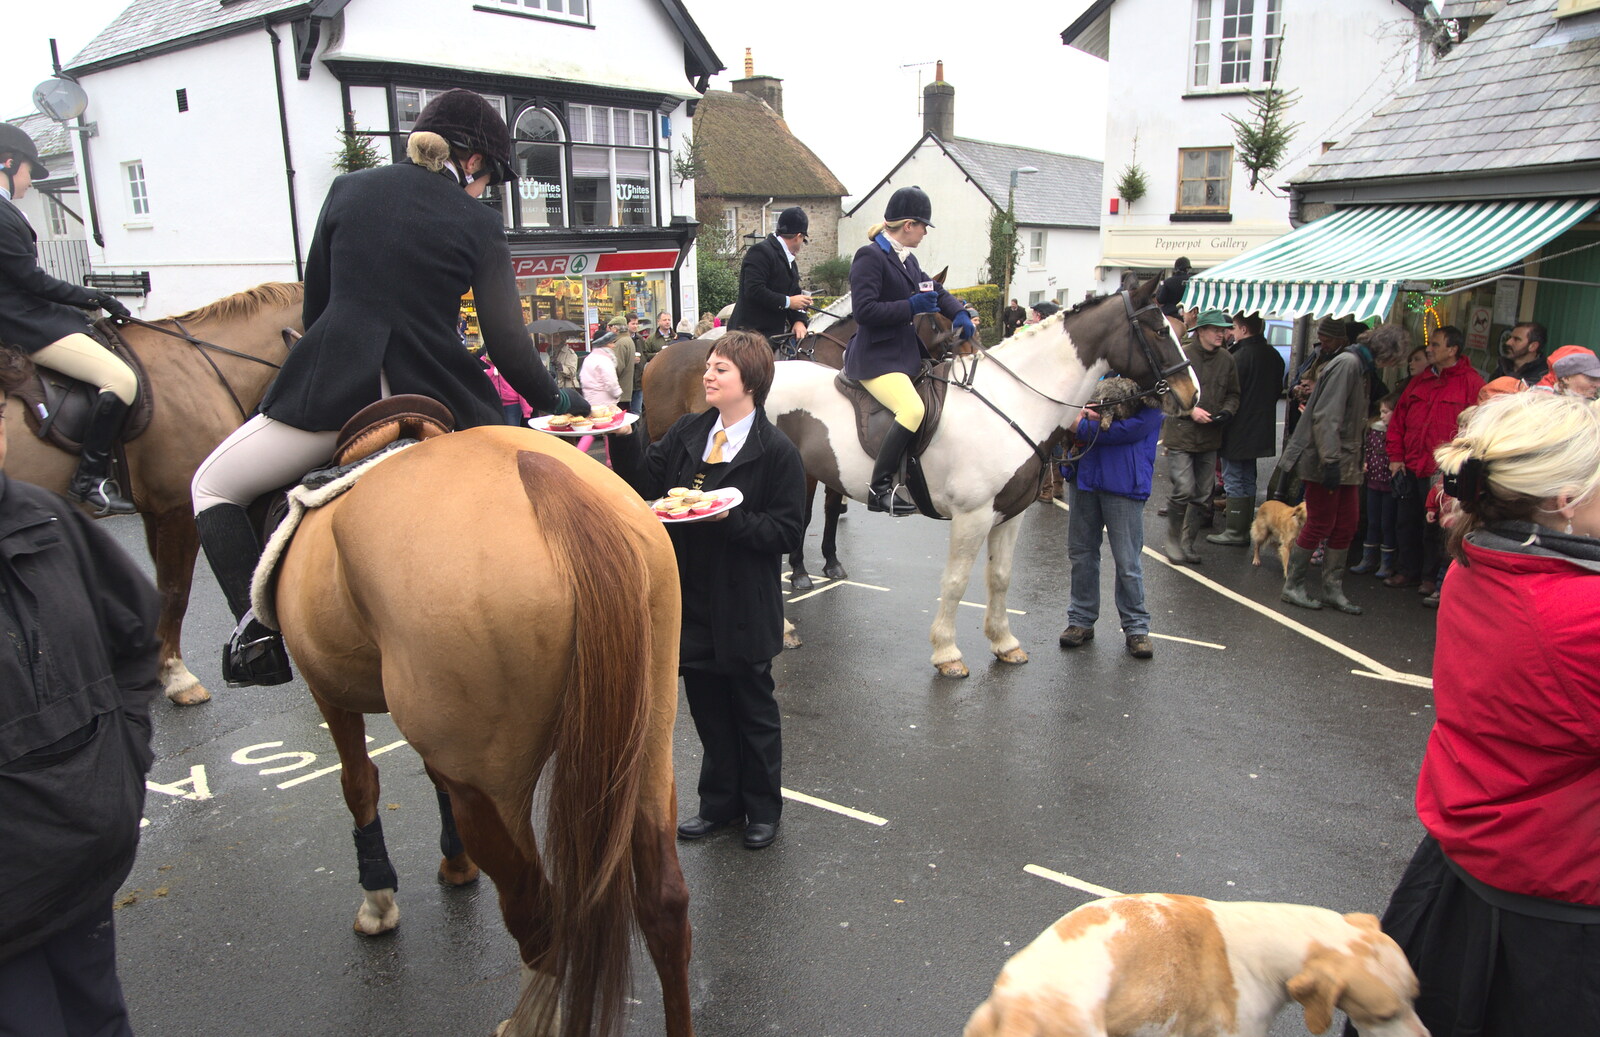 Port and mince pies are handed out from The Boxing Day Hunt, Chagford, Devon - 26th December 2012